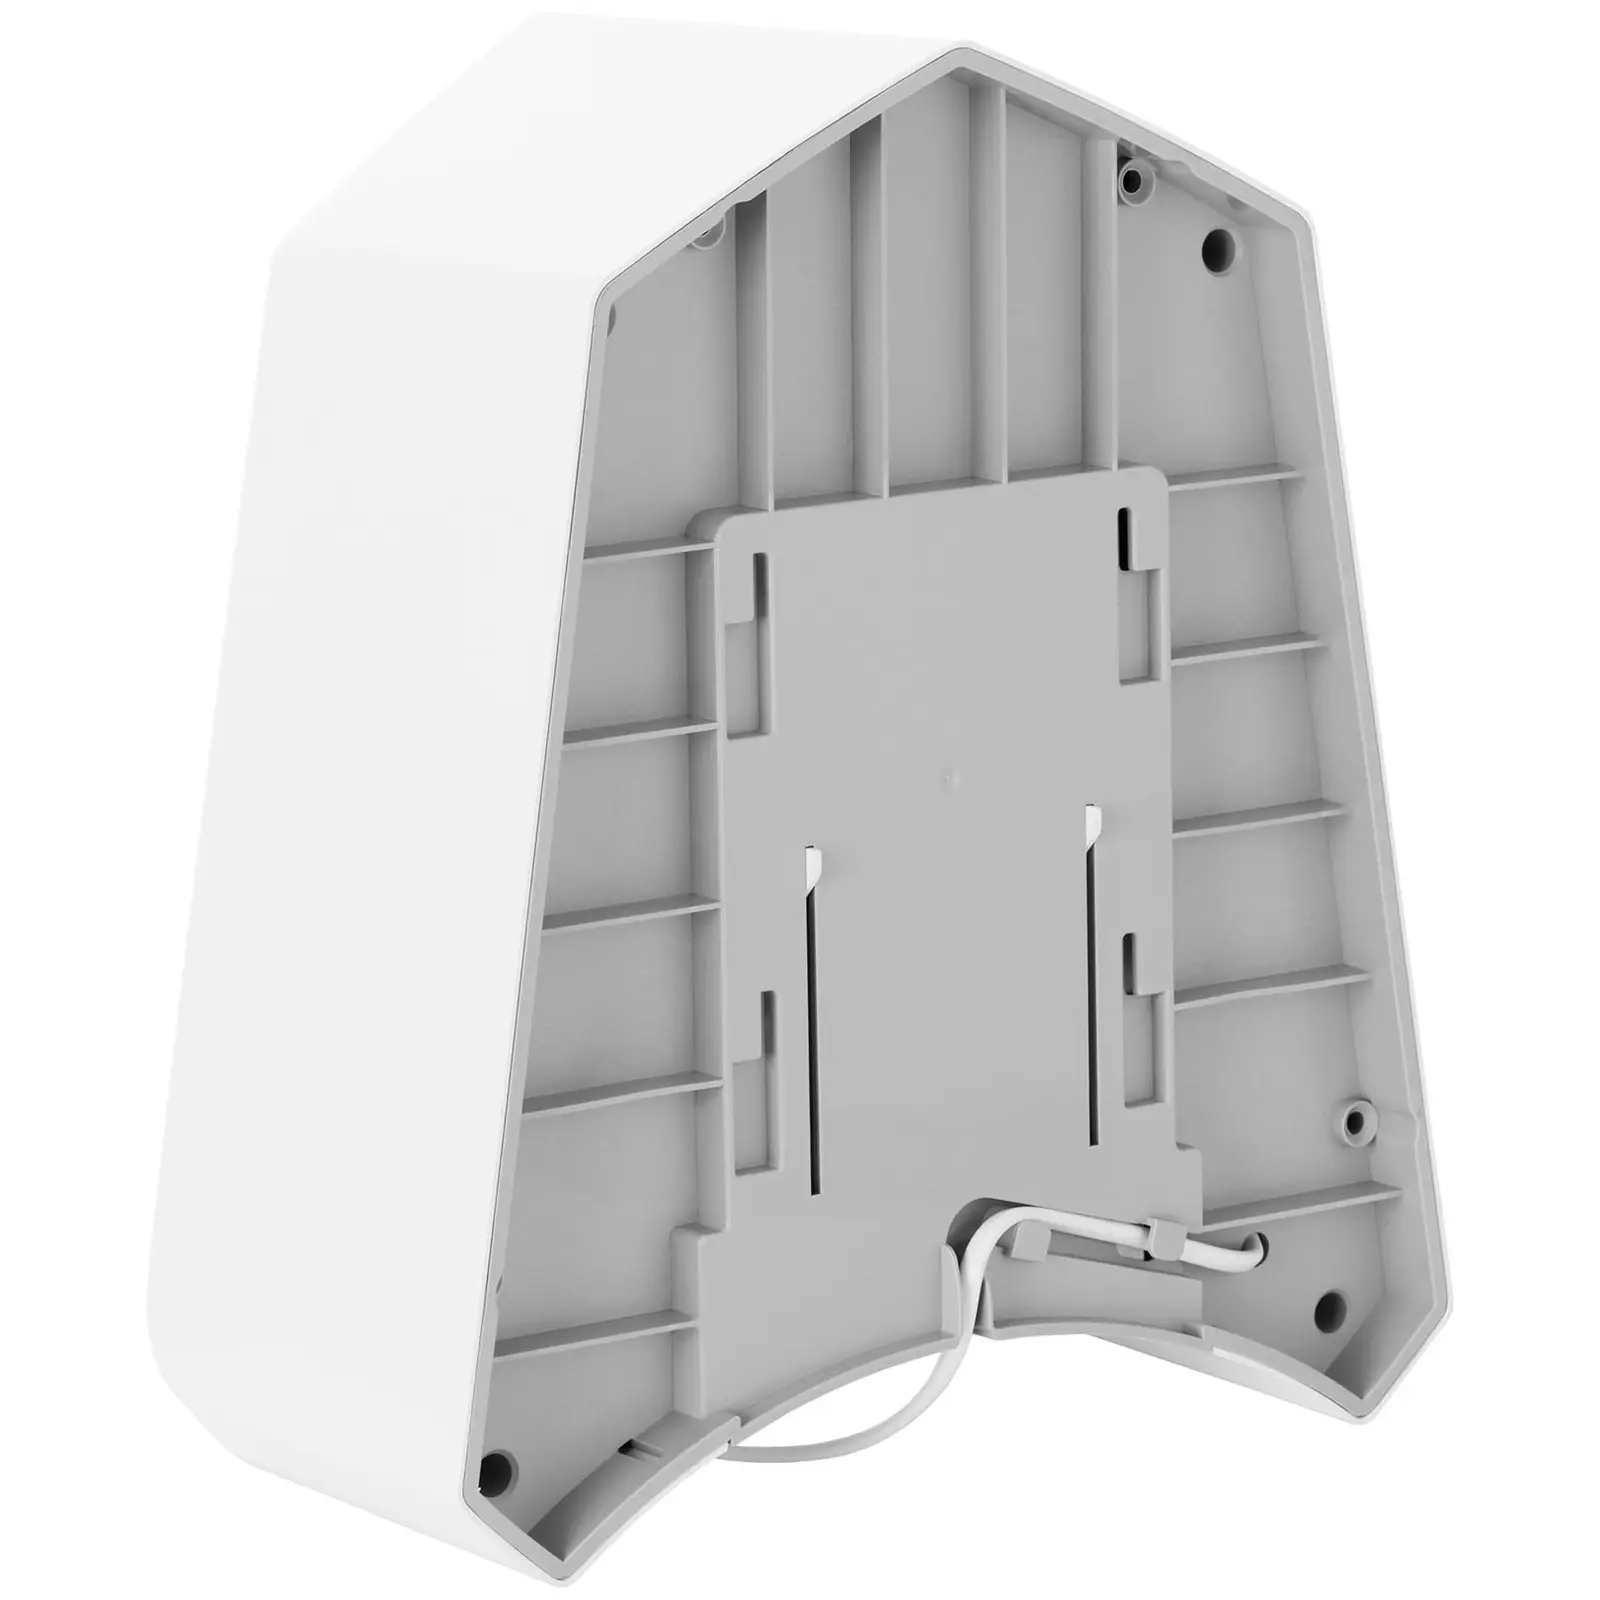 Hand Dryer – electric - 1000 W - 2 levels (warm/cold)